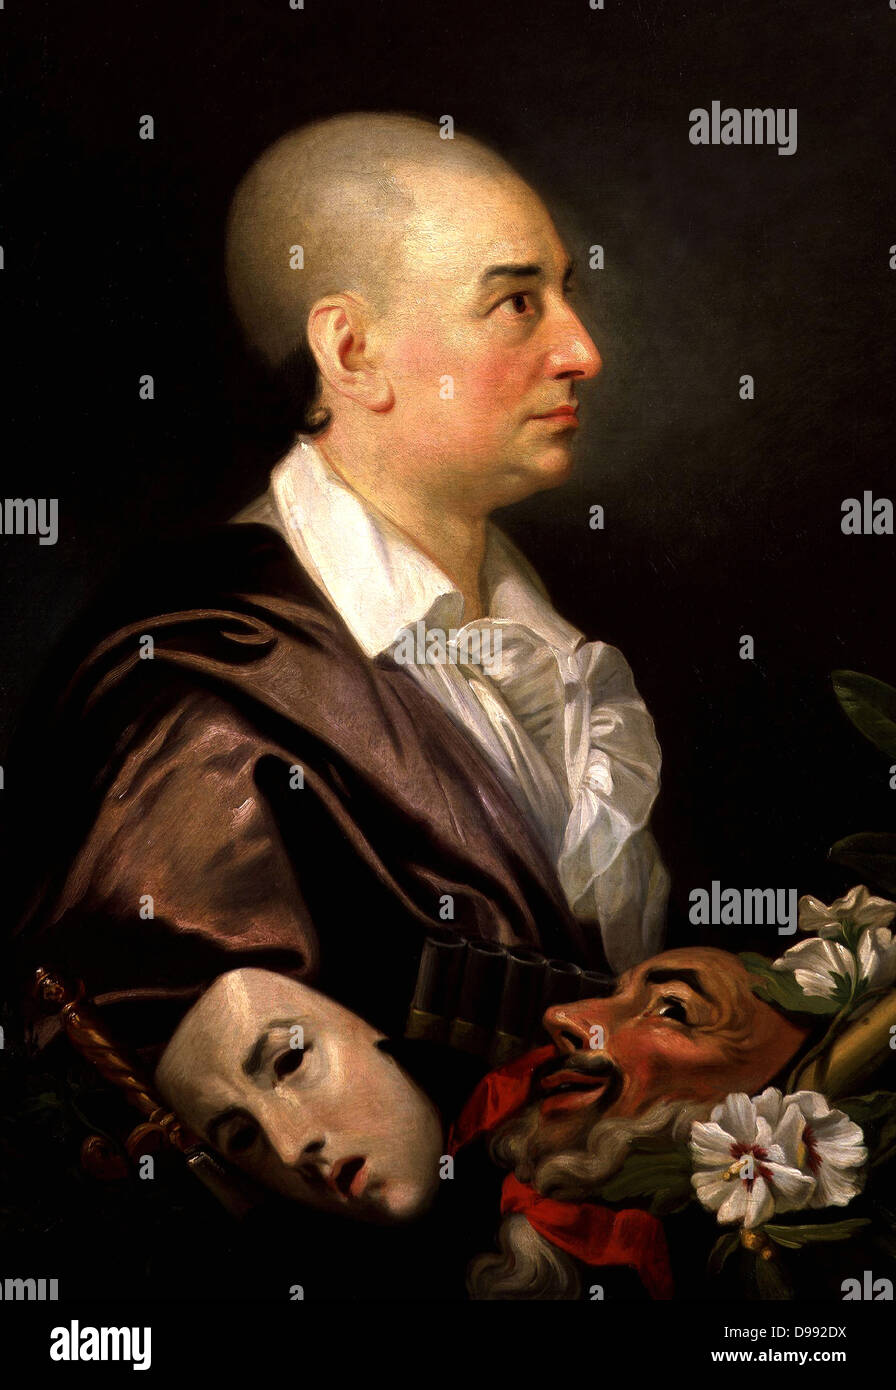 David Garrick' (1717-1779) English actor, theatre manager and playwright. Profile portrait of Garrick bareheaded, with maks of comedy and tragedy. Johann Zoffany or Zauffelij (1733–1810) German painter, active mainly in England. Stock Photo